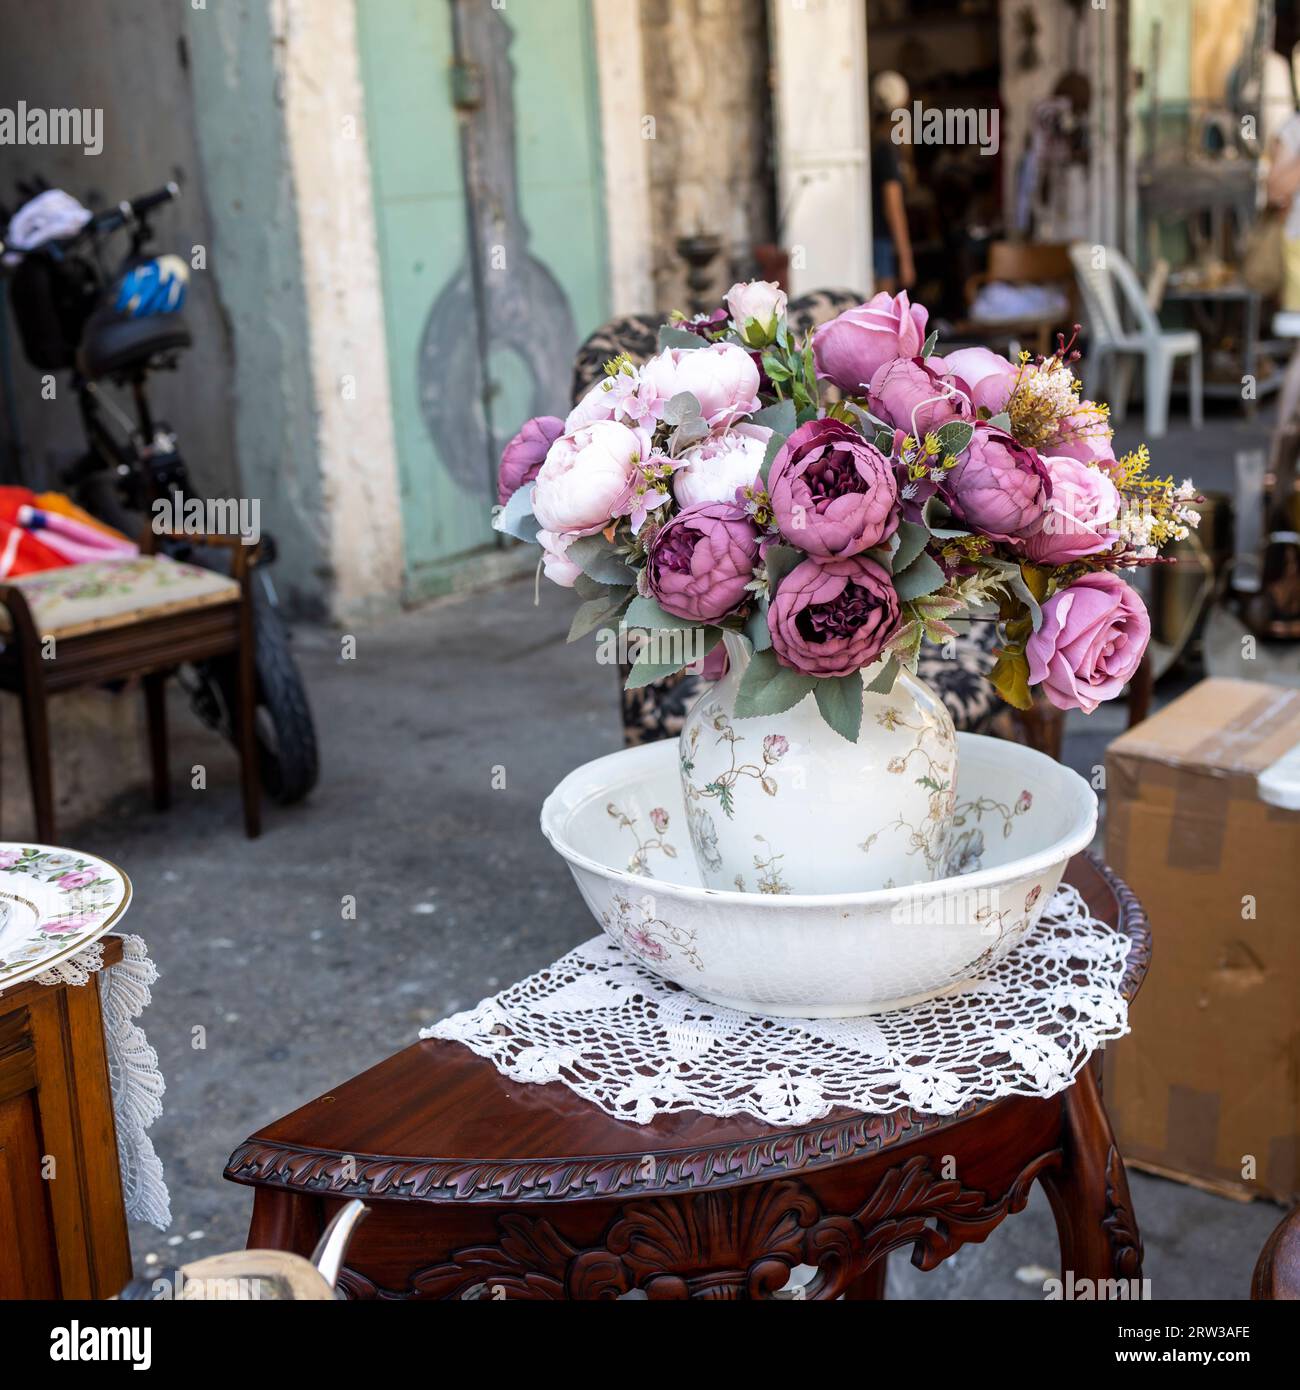 A bouquet of artificial roses, hydrangeas, peony, daisies in a white ceramic jug at a flea market on a table. Stock Photo